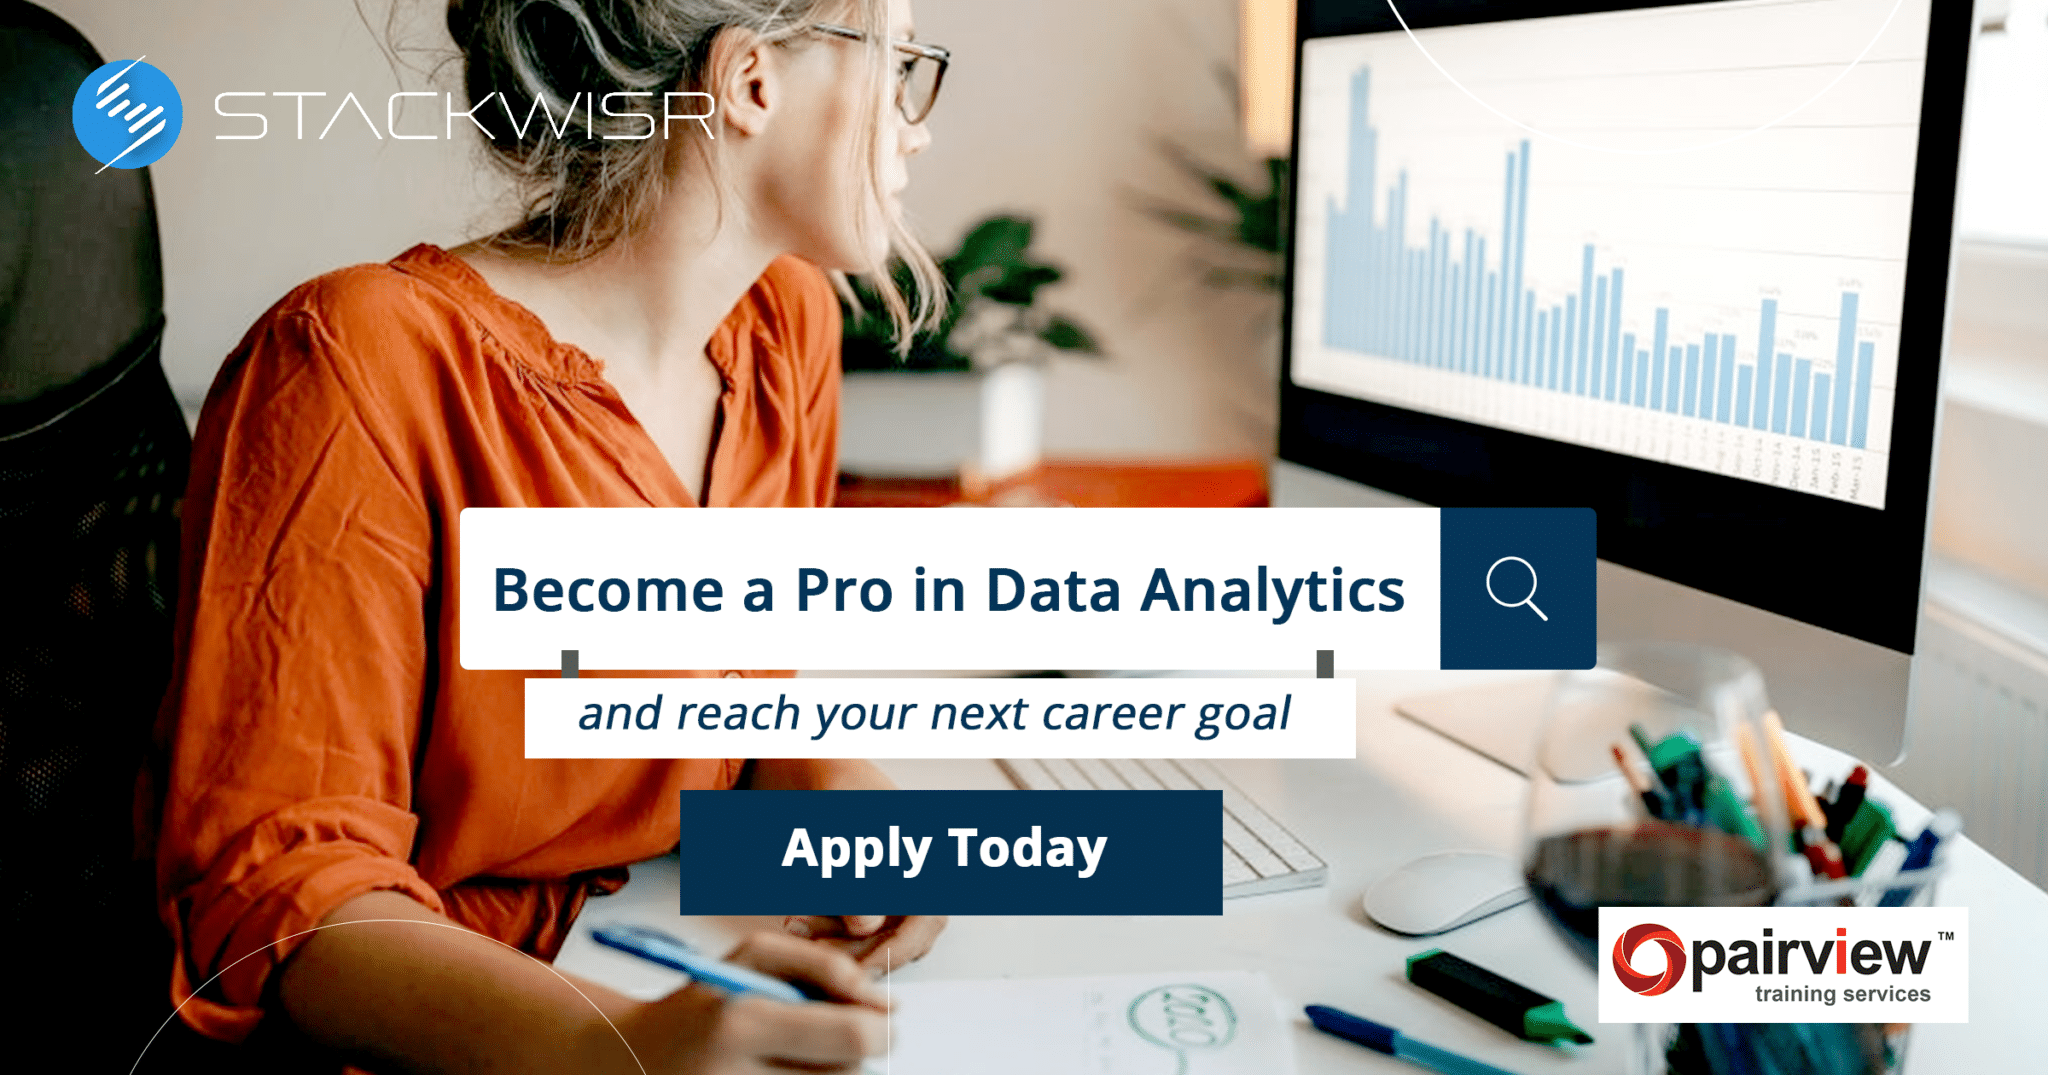 Become-A-Pro-in-Data-Analytics-StackwisR-by-Pairview